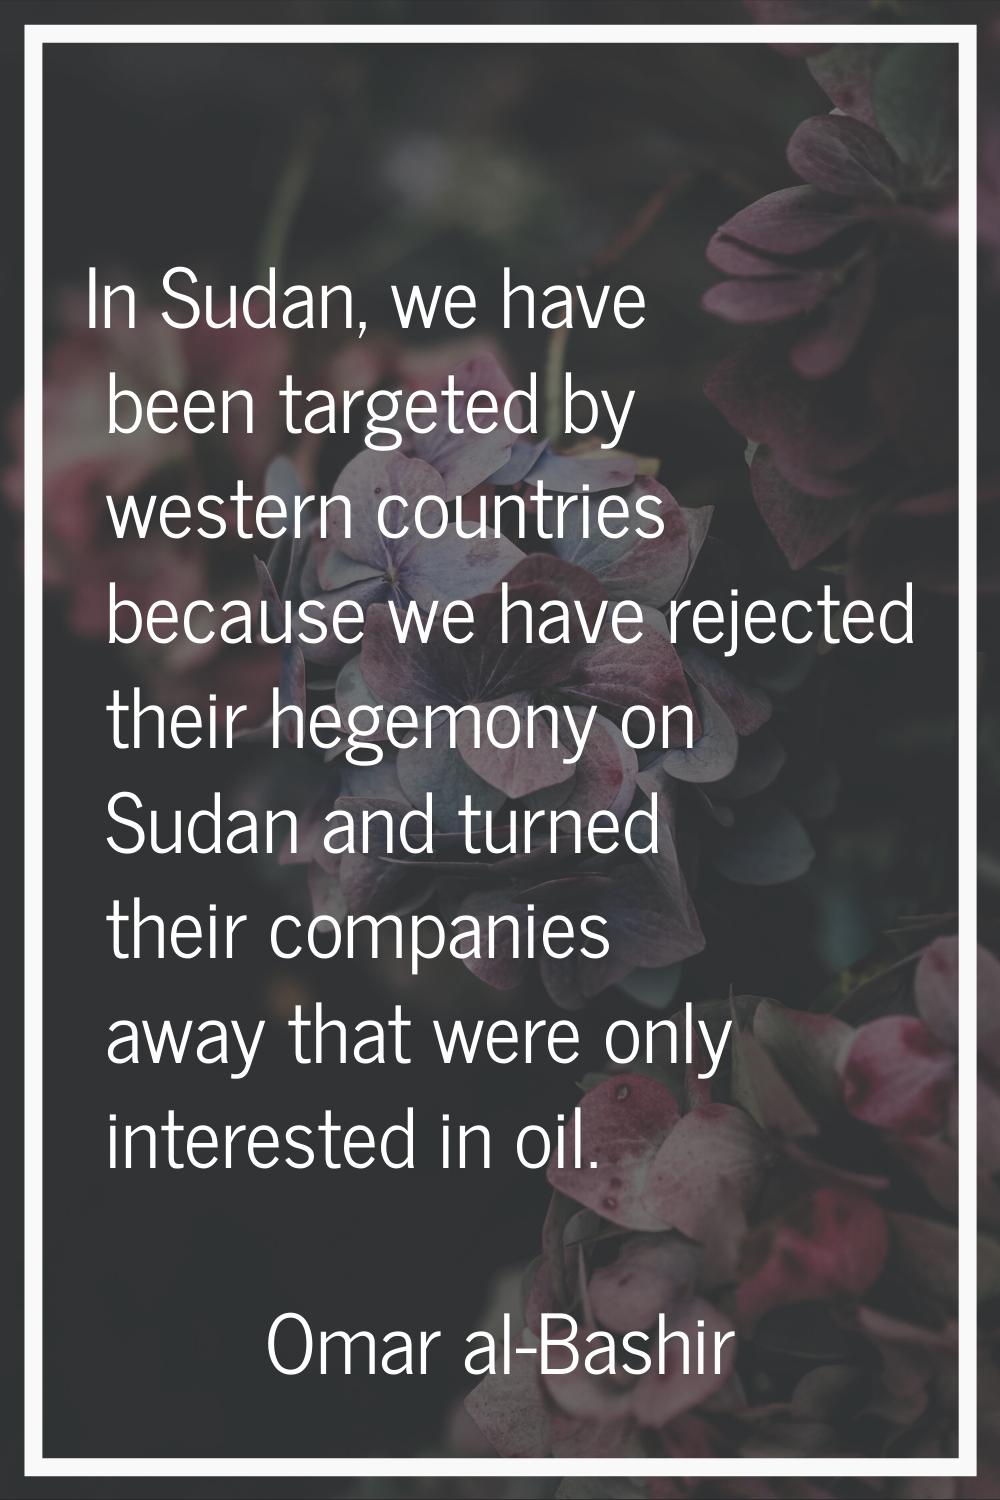 In Sudan, we have been targeted by western countries because we have rejected their hegemony on Sud